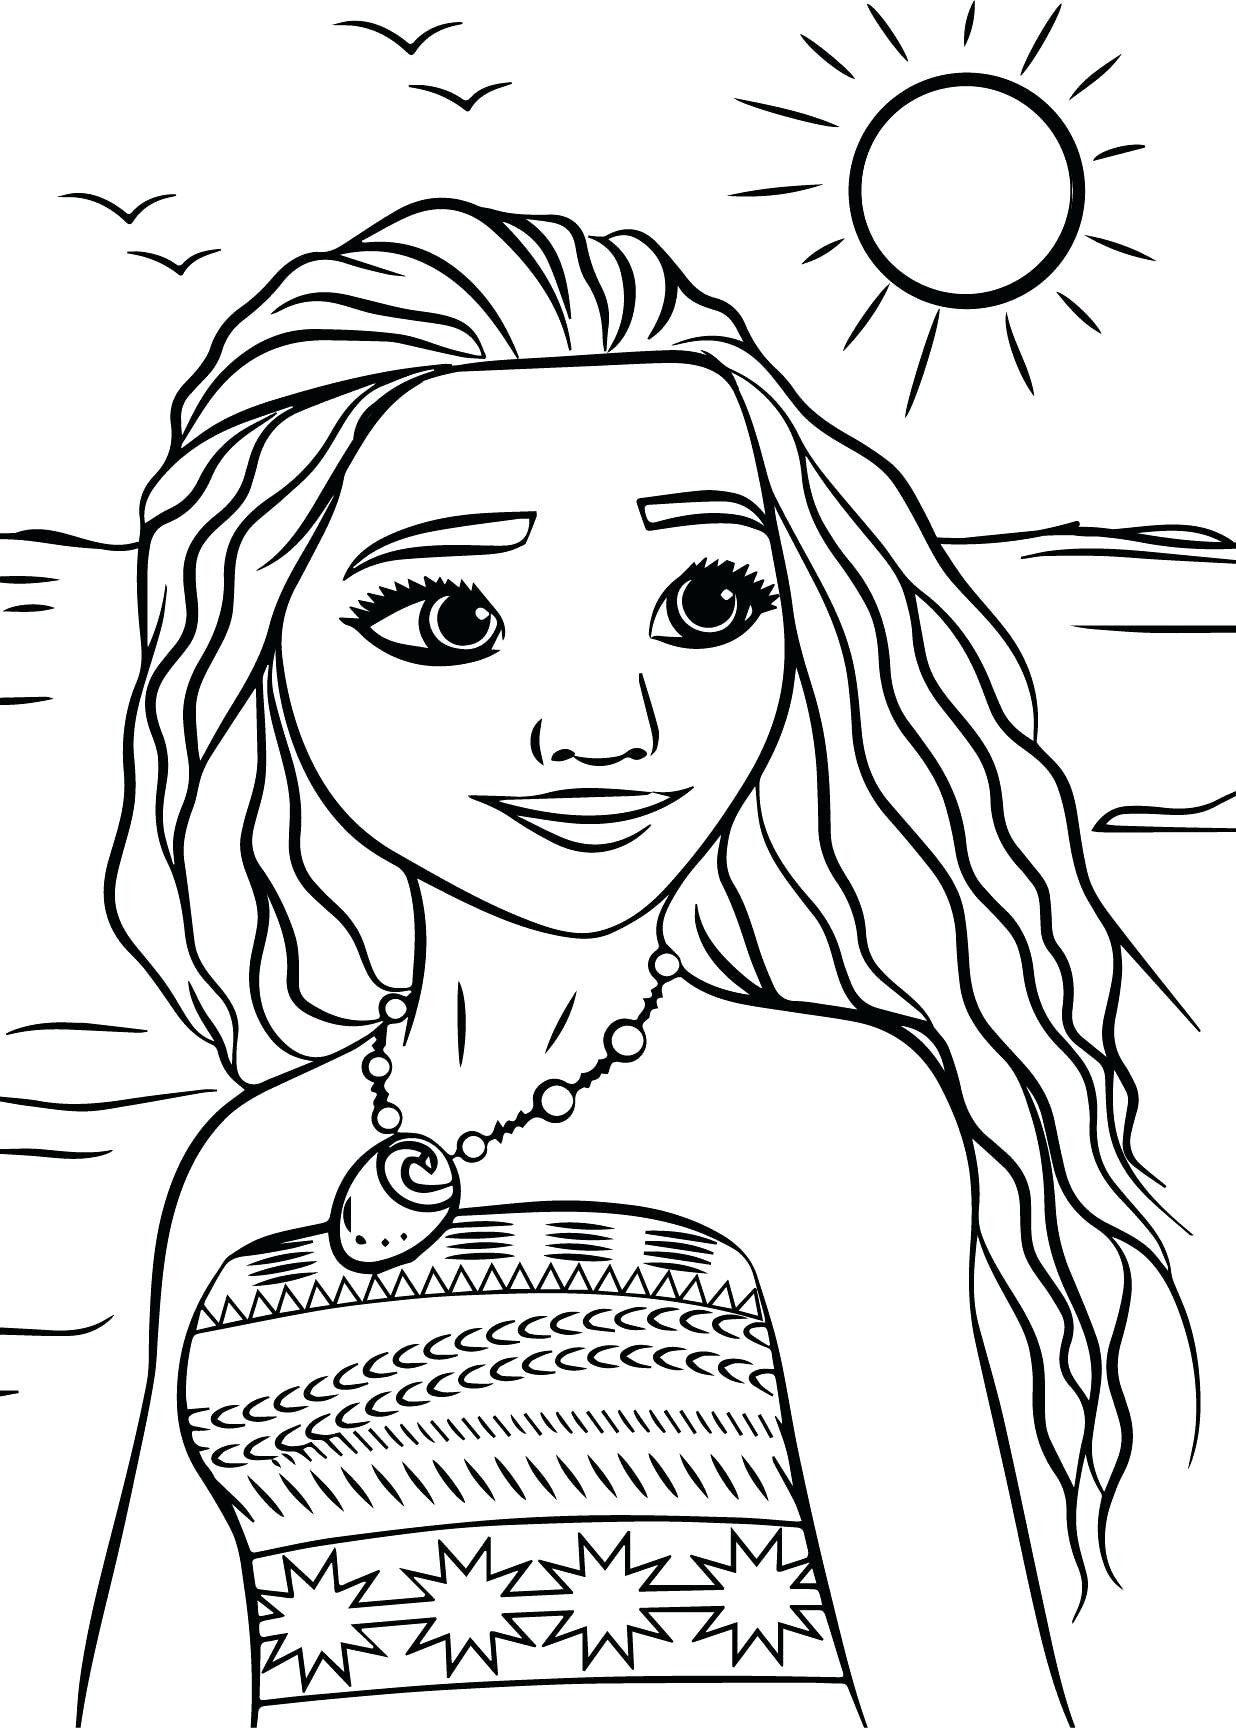 Princess Coloring Pages Inspirationa Princess Coloring Pages Pdf Printable S Humorous Lovely